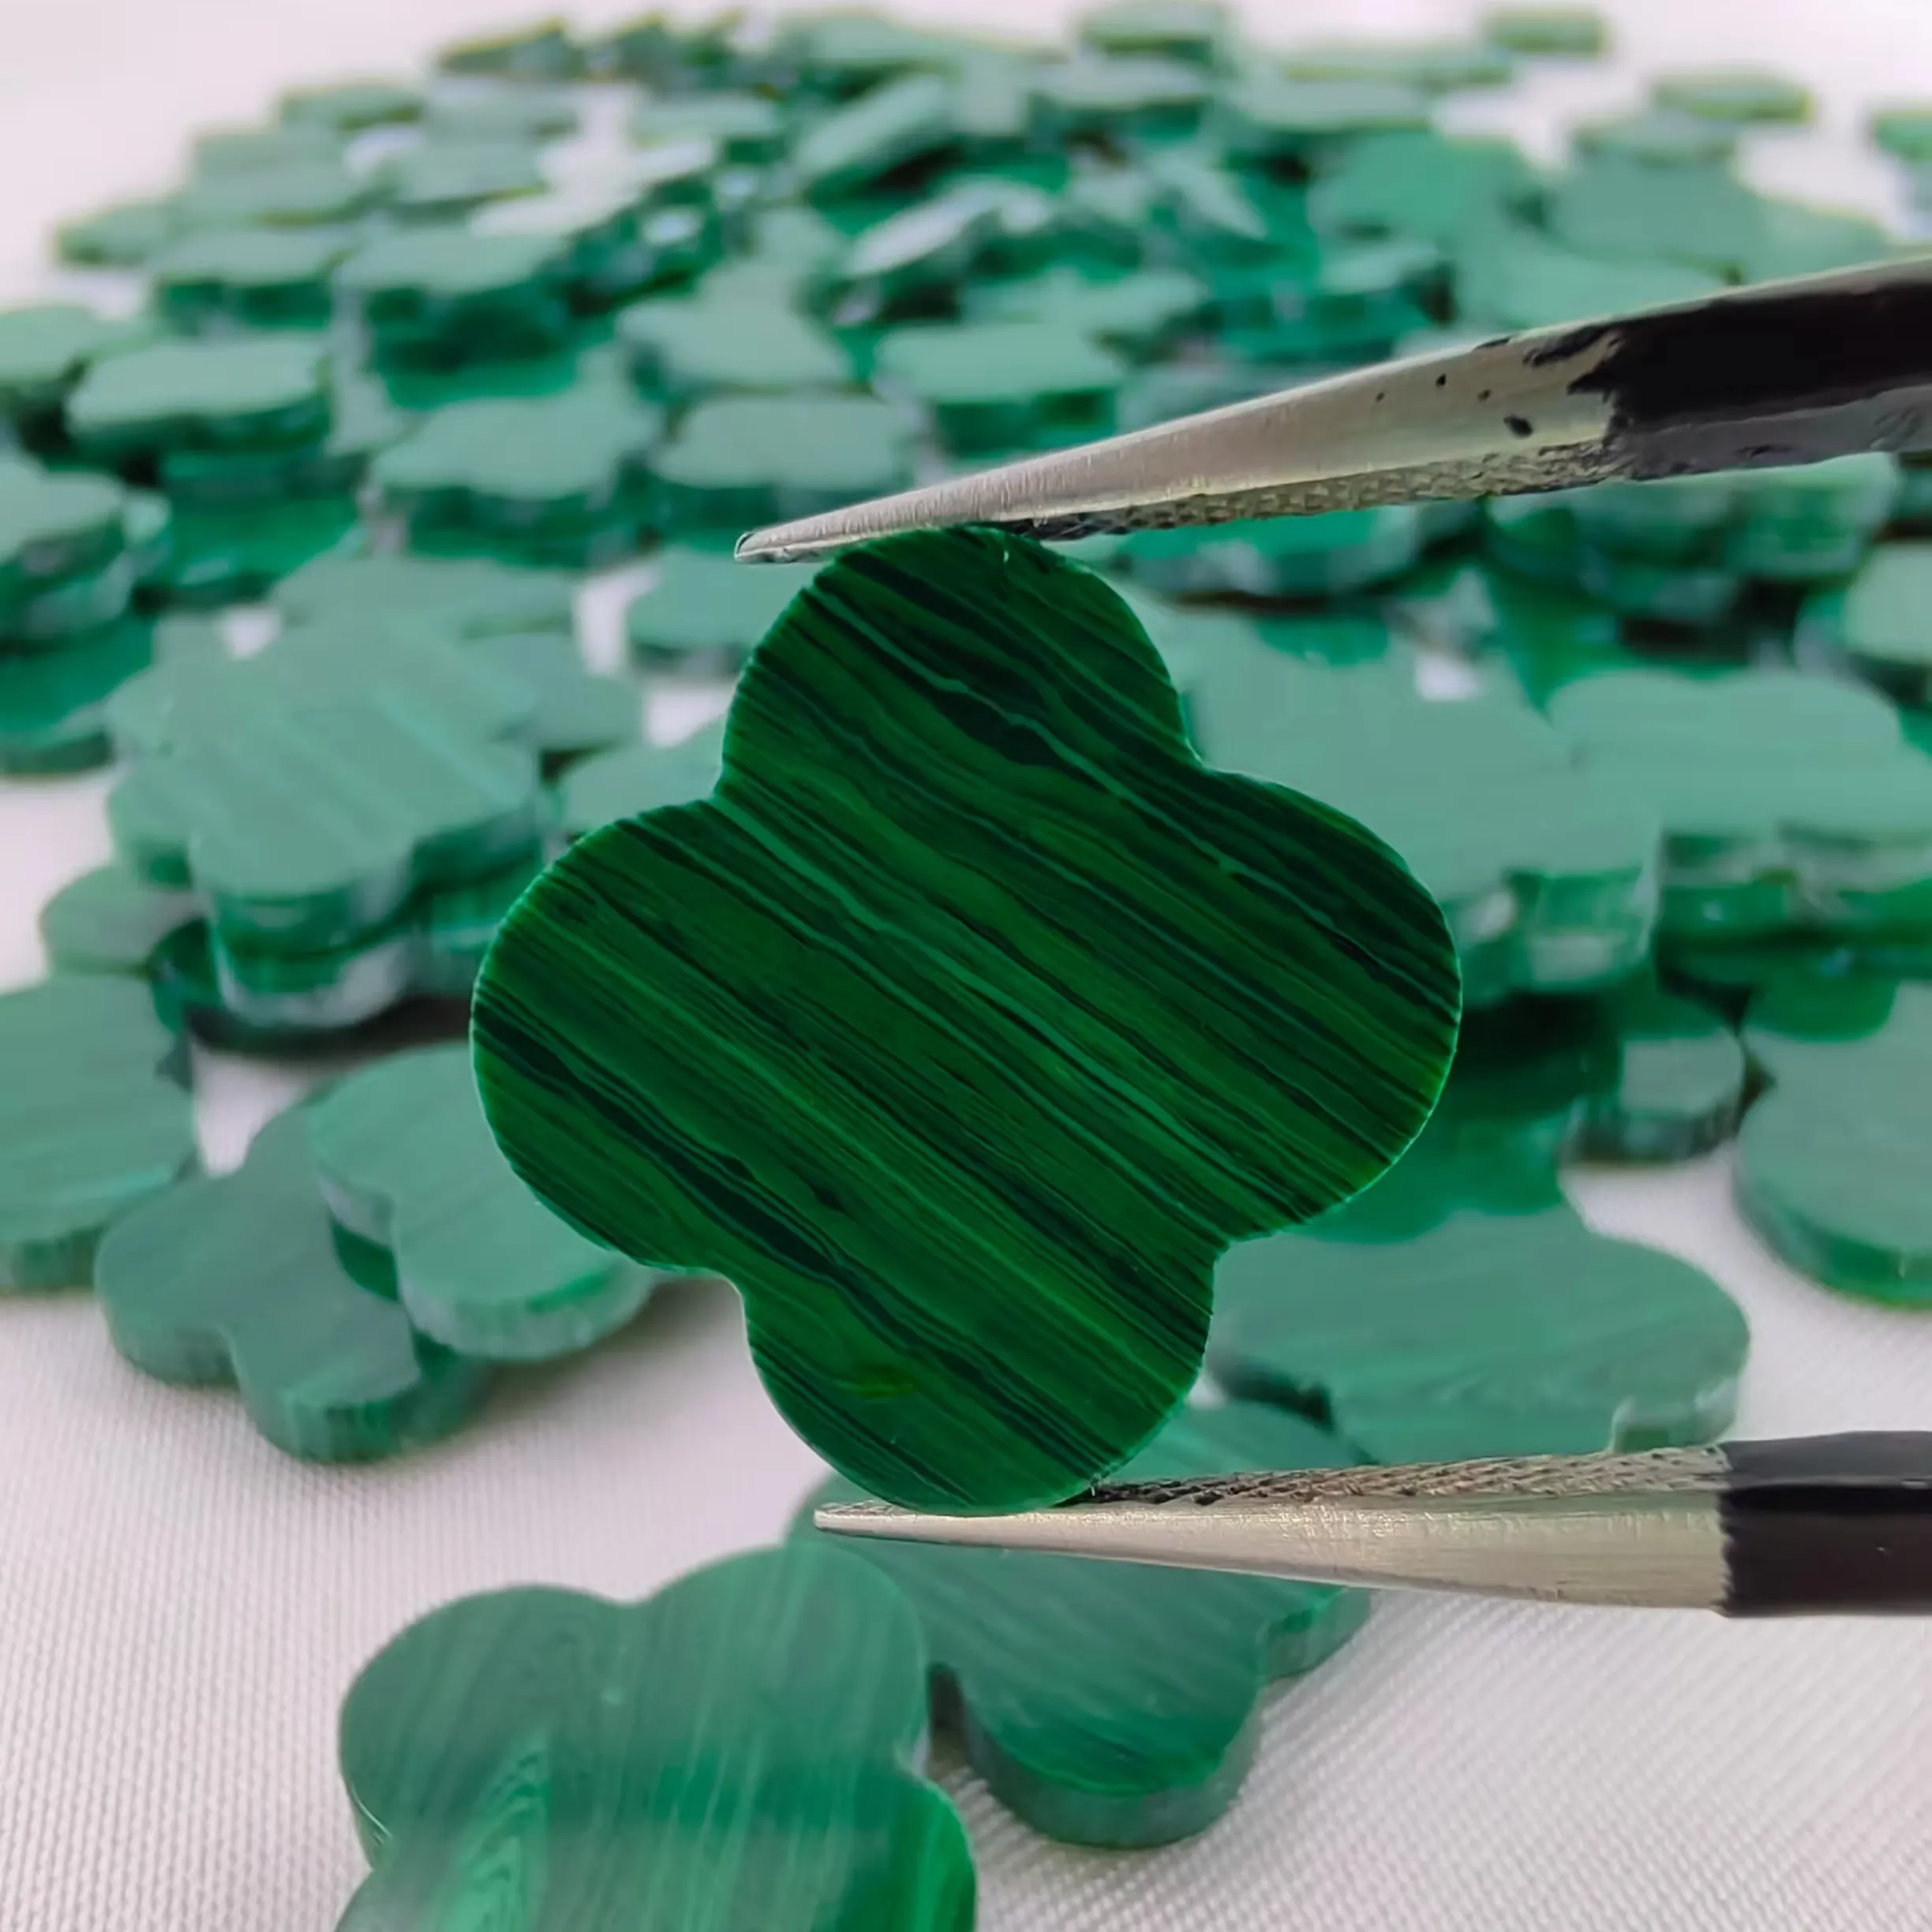 Wholesale Natural Malachite 4-Leaf Shape Loose Gemstones Stone for Jewellery Making 6x6 to 20x20